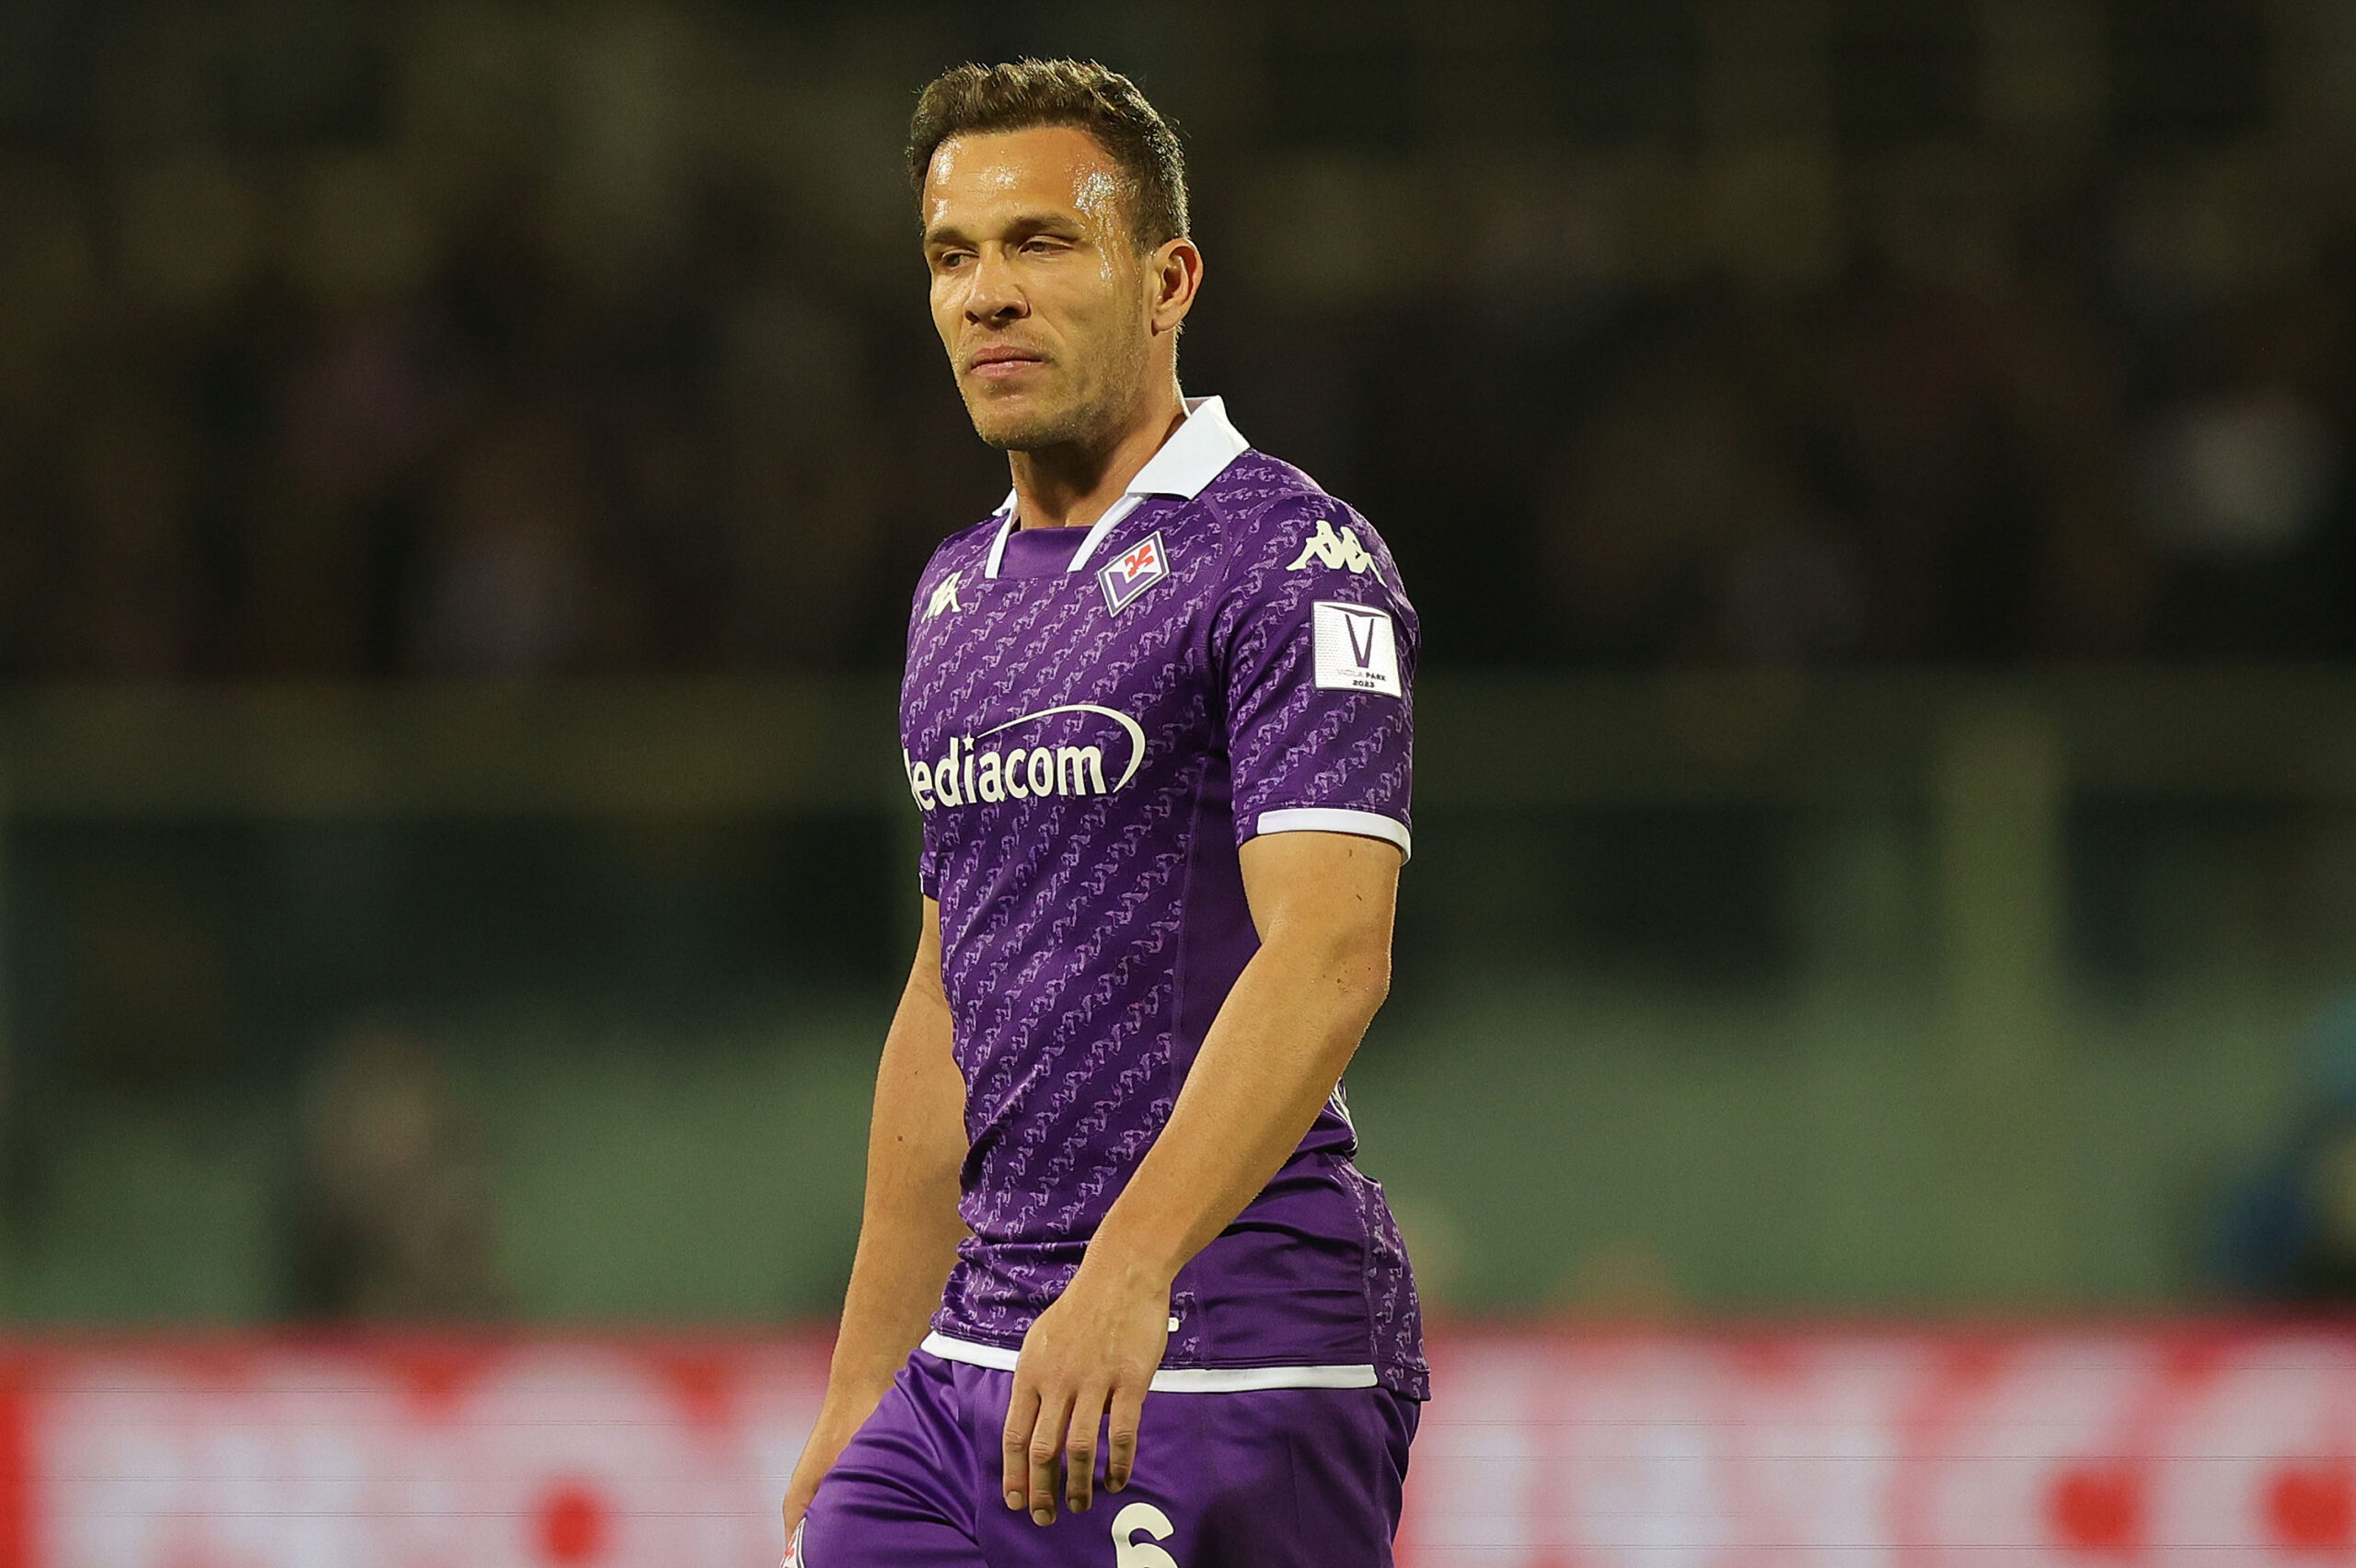 Arthur had a convincing first half of the season at Fiorentina on loan from Juventus, but his form has dipped in the last couple of months.